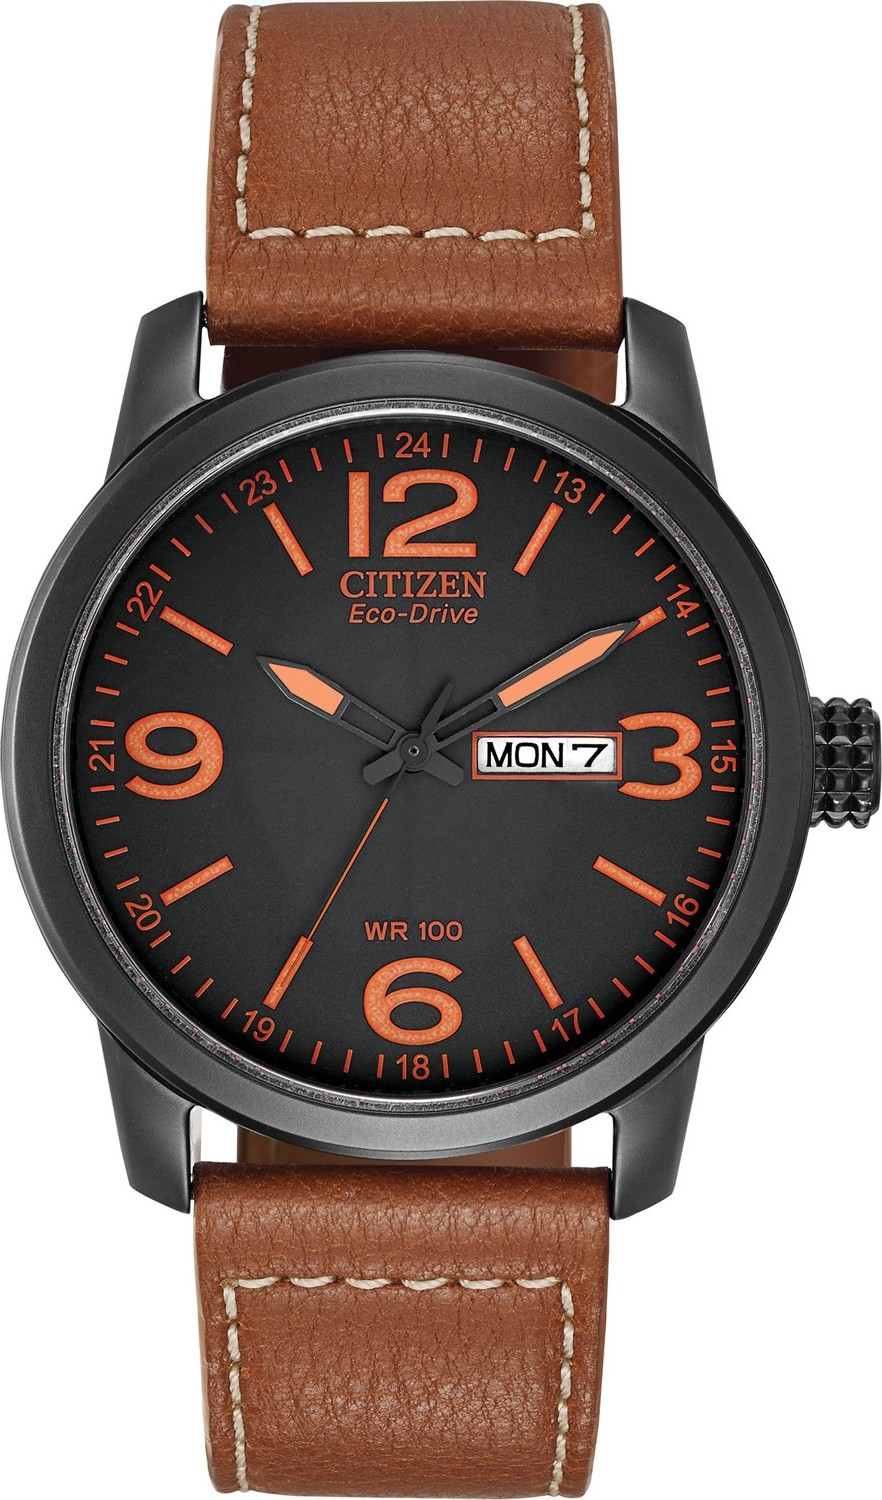 Citizen BM8475-26E Eco-Drive Synthetic Leather Watch, 42mm